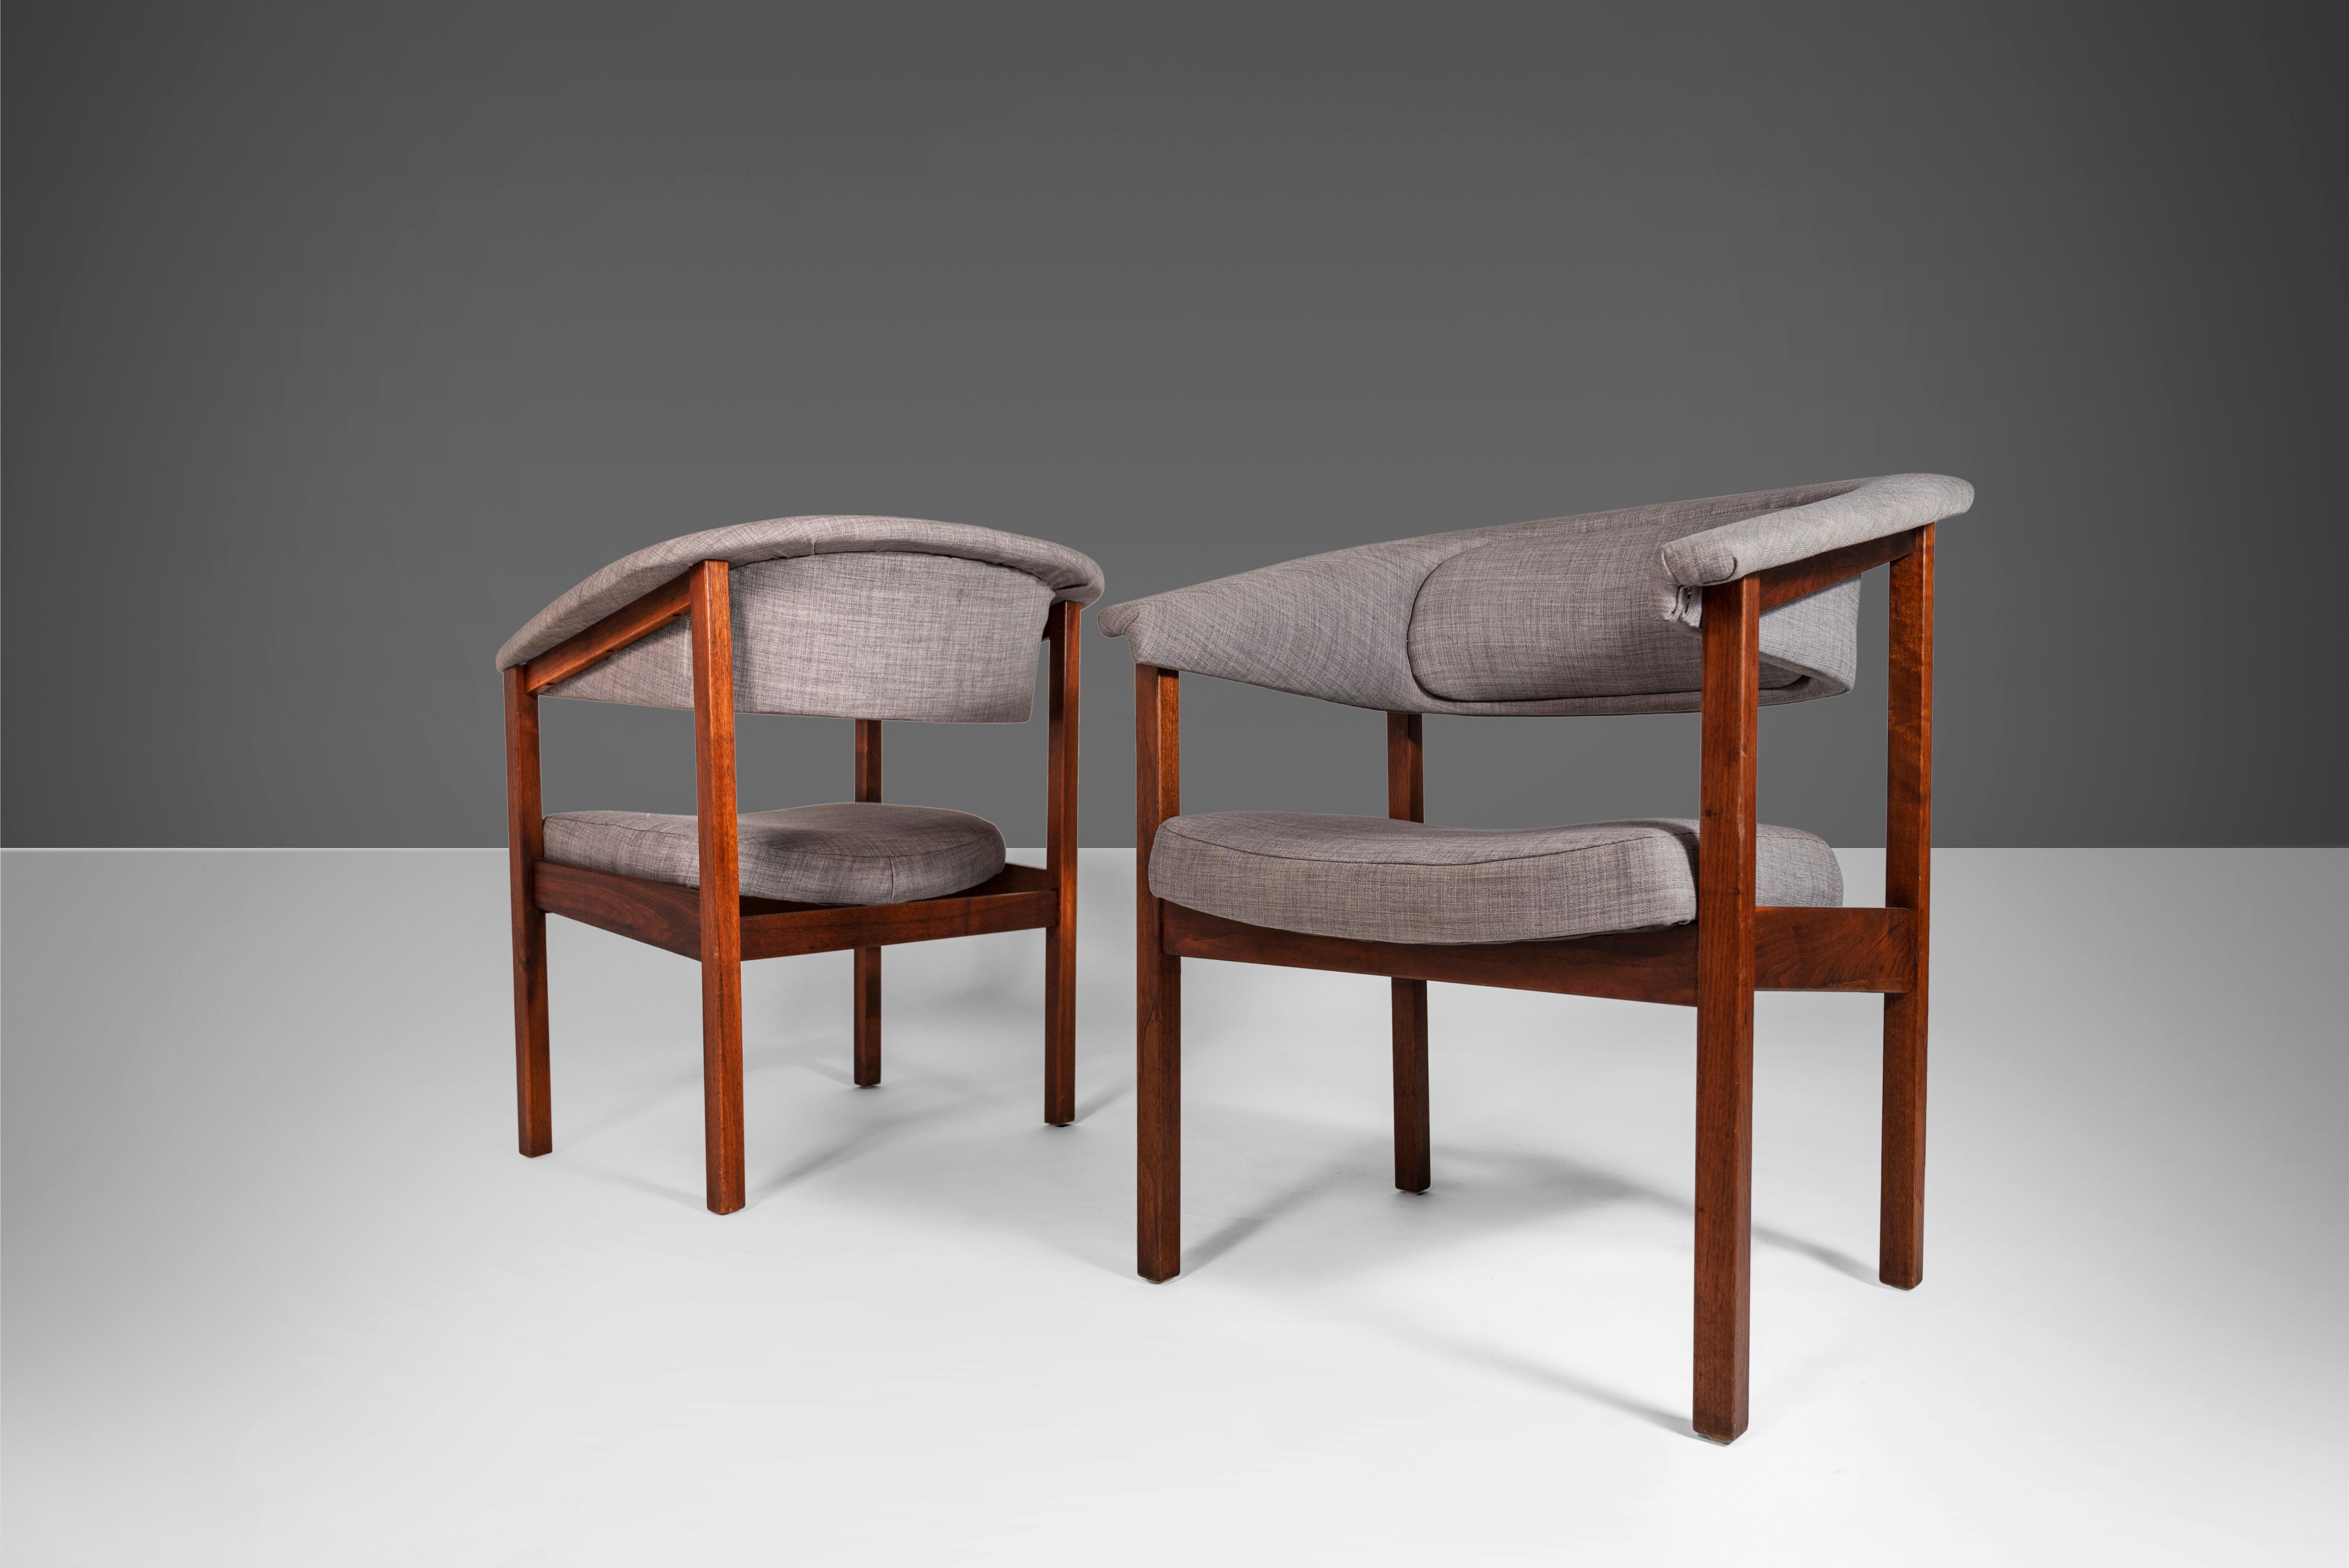 Pair of Chairs by Arthur Umanoff for Madison in Original Knit Fabric, c. 1960s For Sale 1